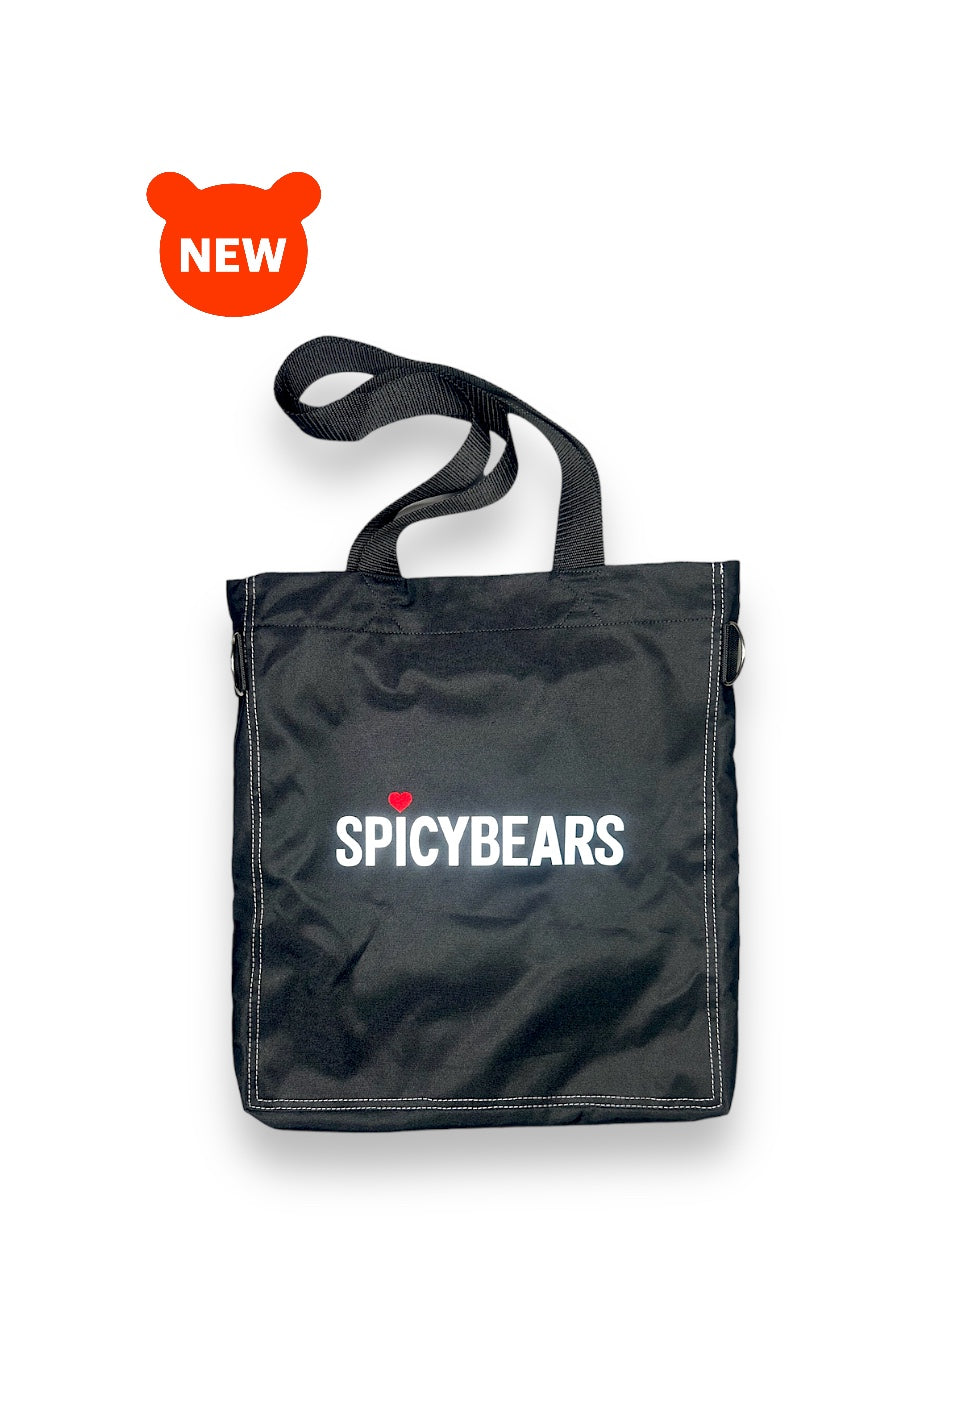 SPICYBEARS Tote | Black | White Reflective | Red Heart - SPICYBEARS